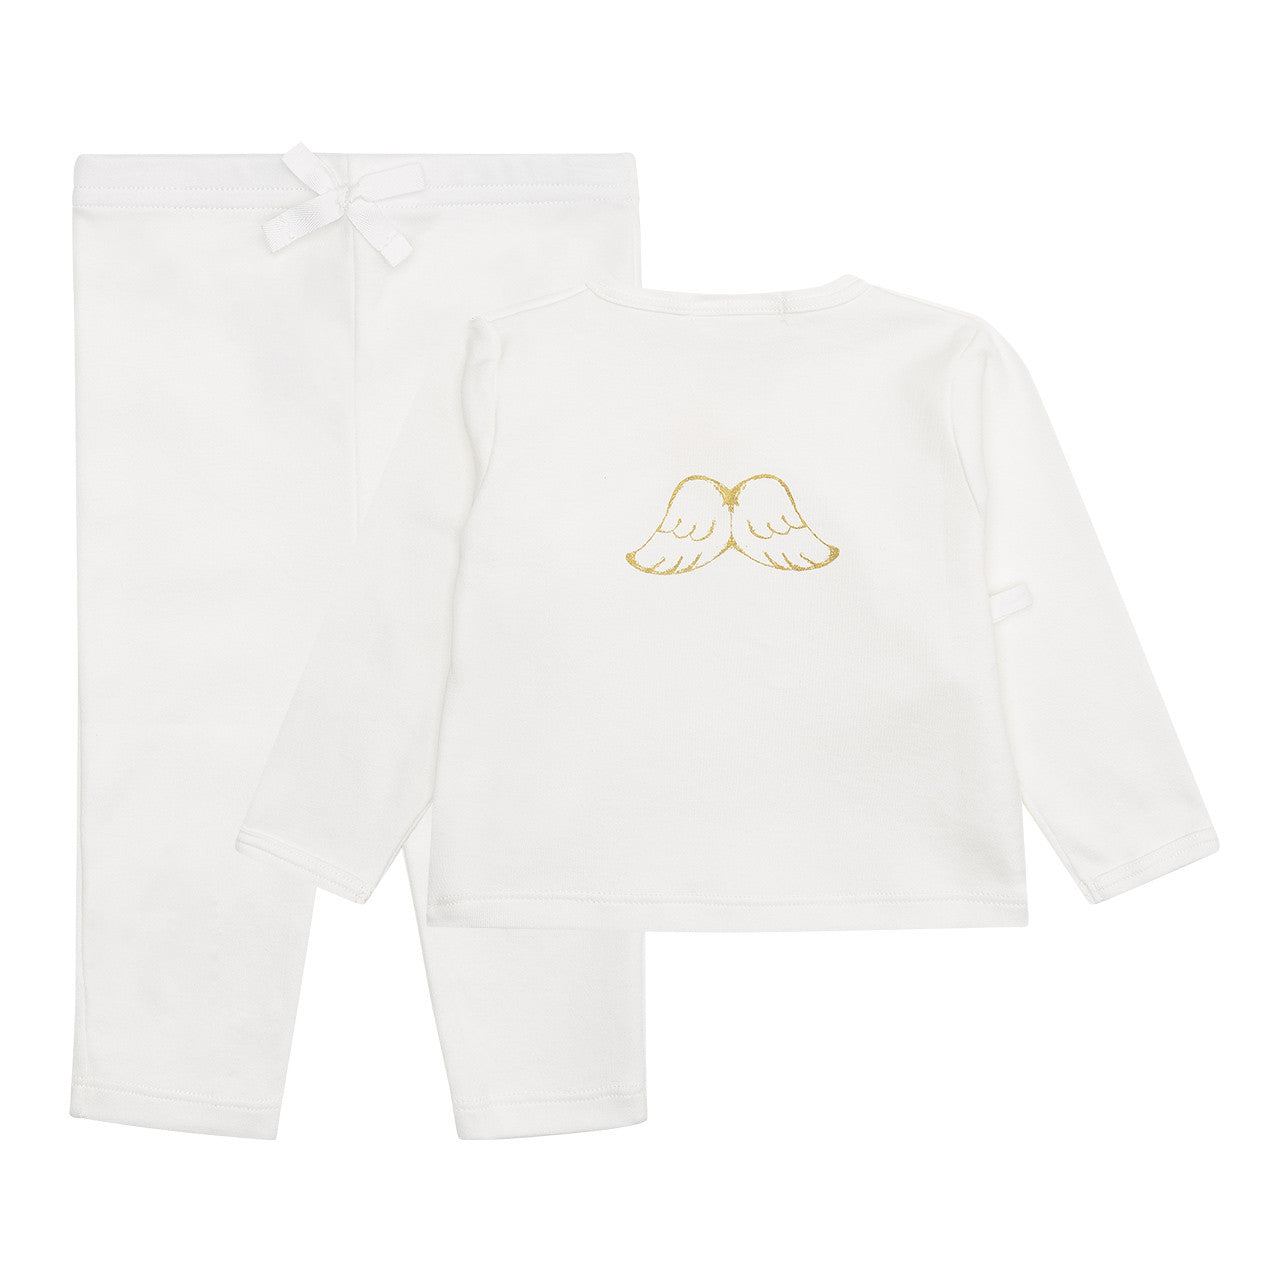 Marie- Chantal cream baby clothing set with wrap over front and ties 